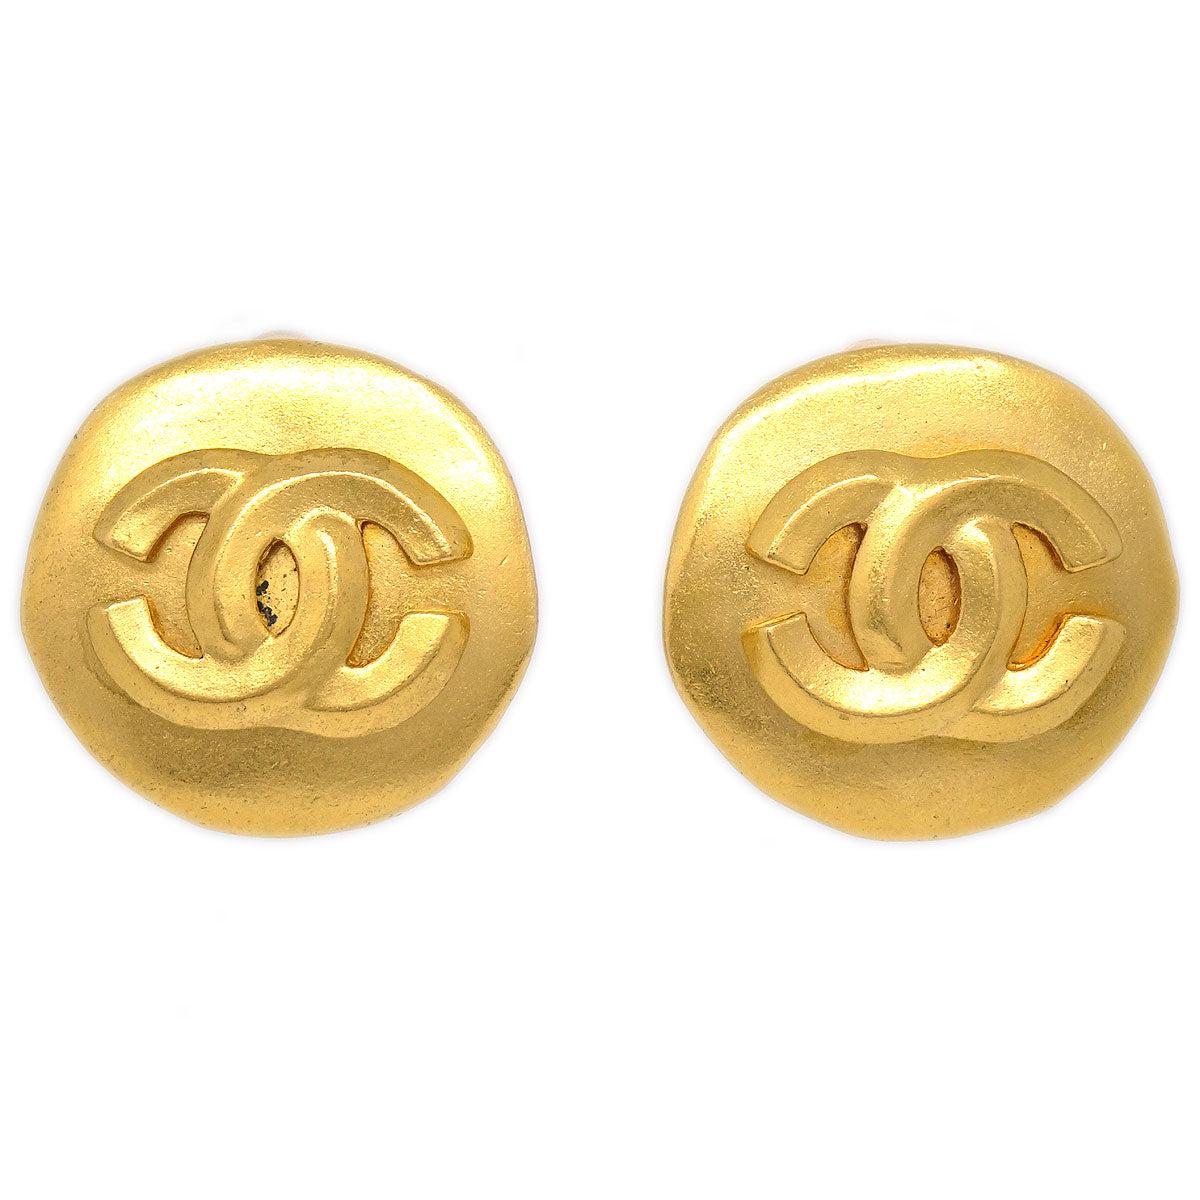 Chanel 1996 Round Cc Earrings Large in Metallic